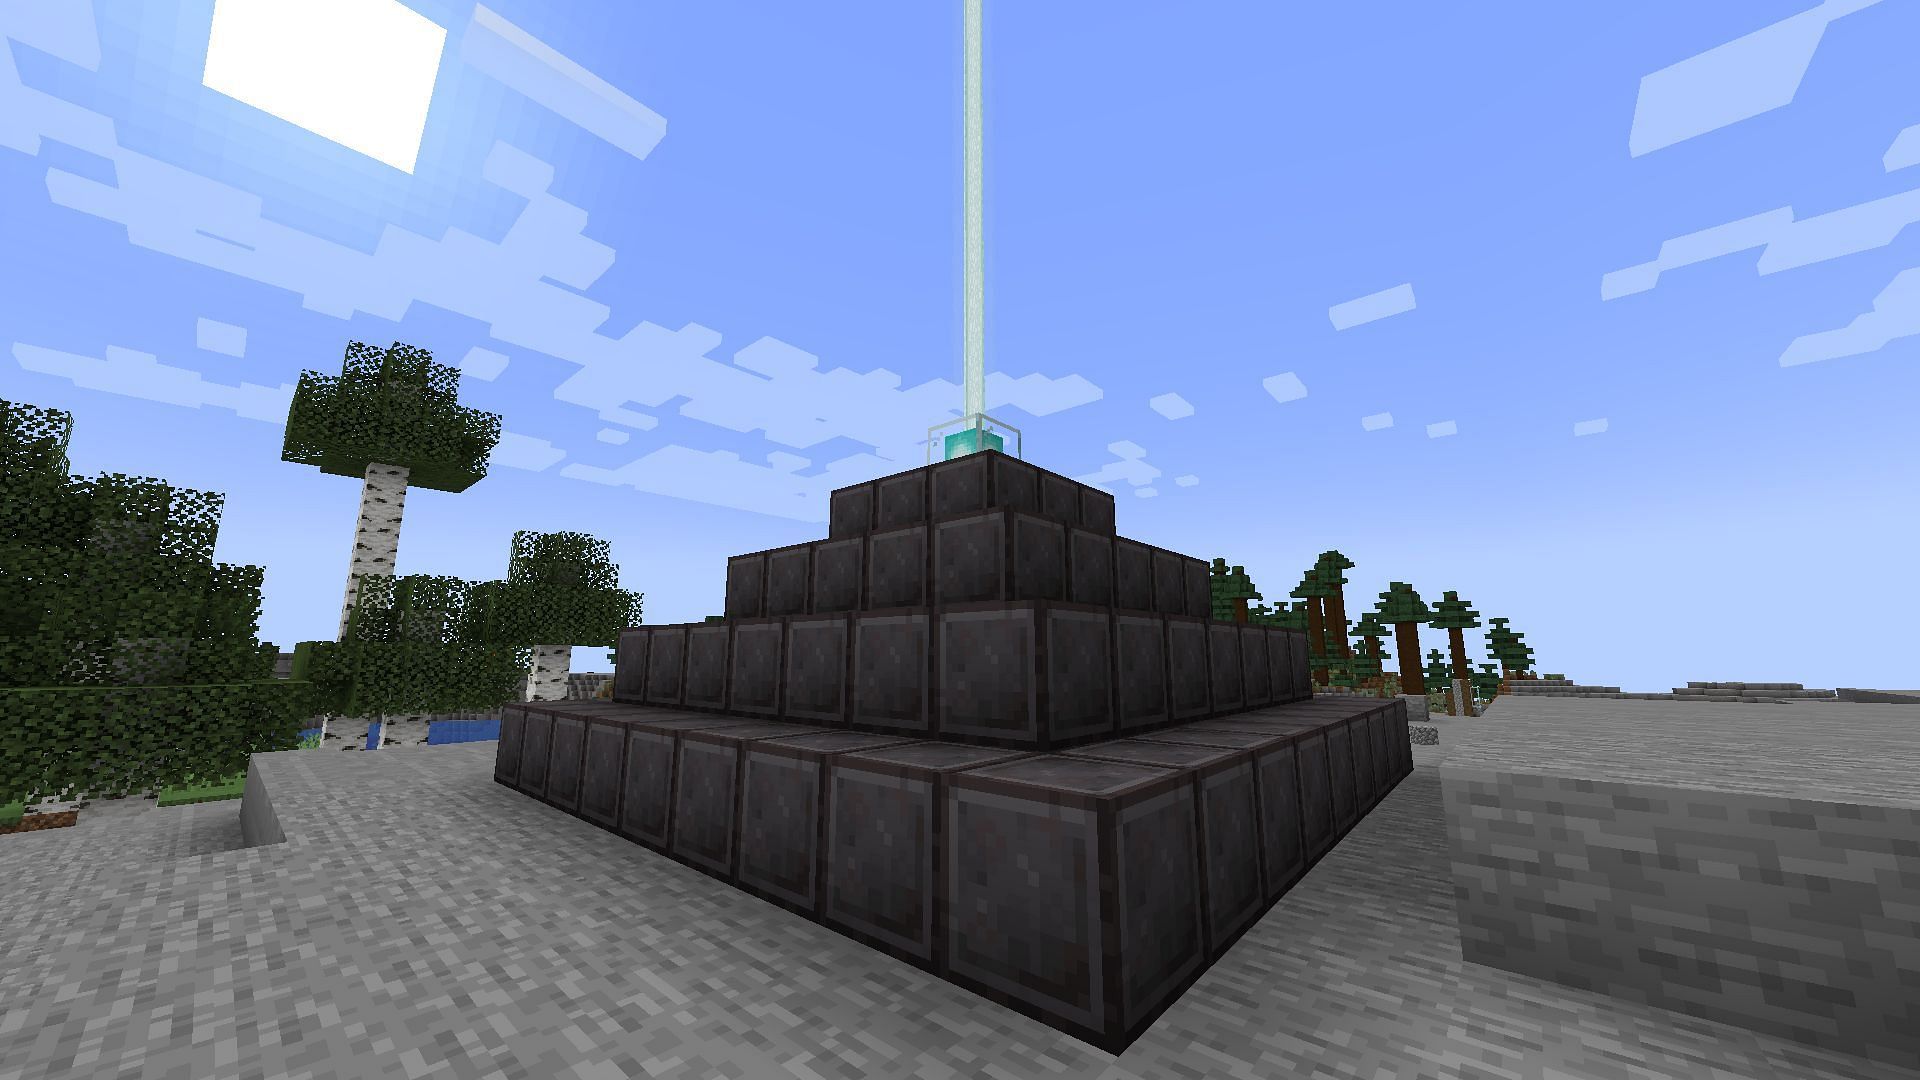 Beacons give several positive status effects to players in Minecraft (Image via Mojang)